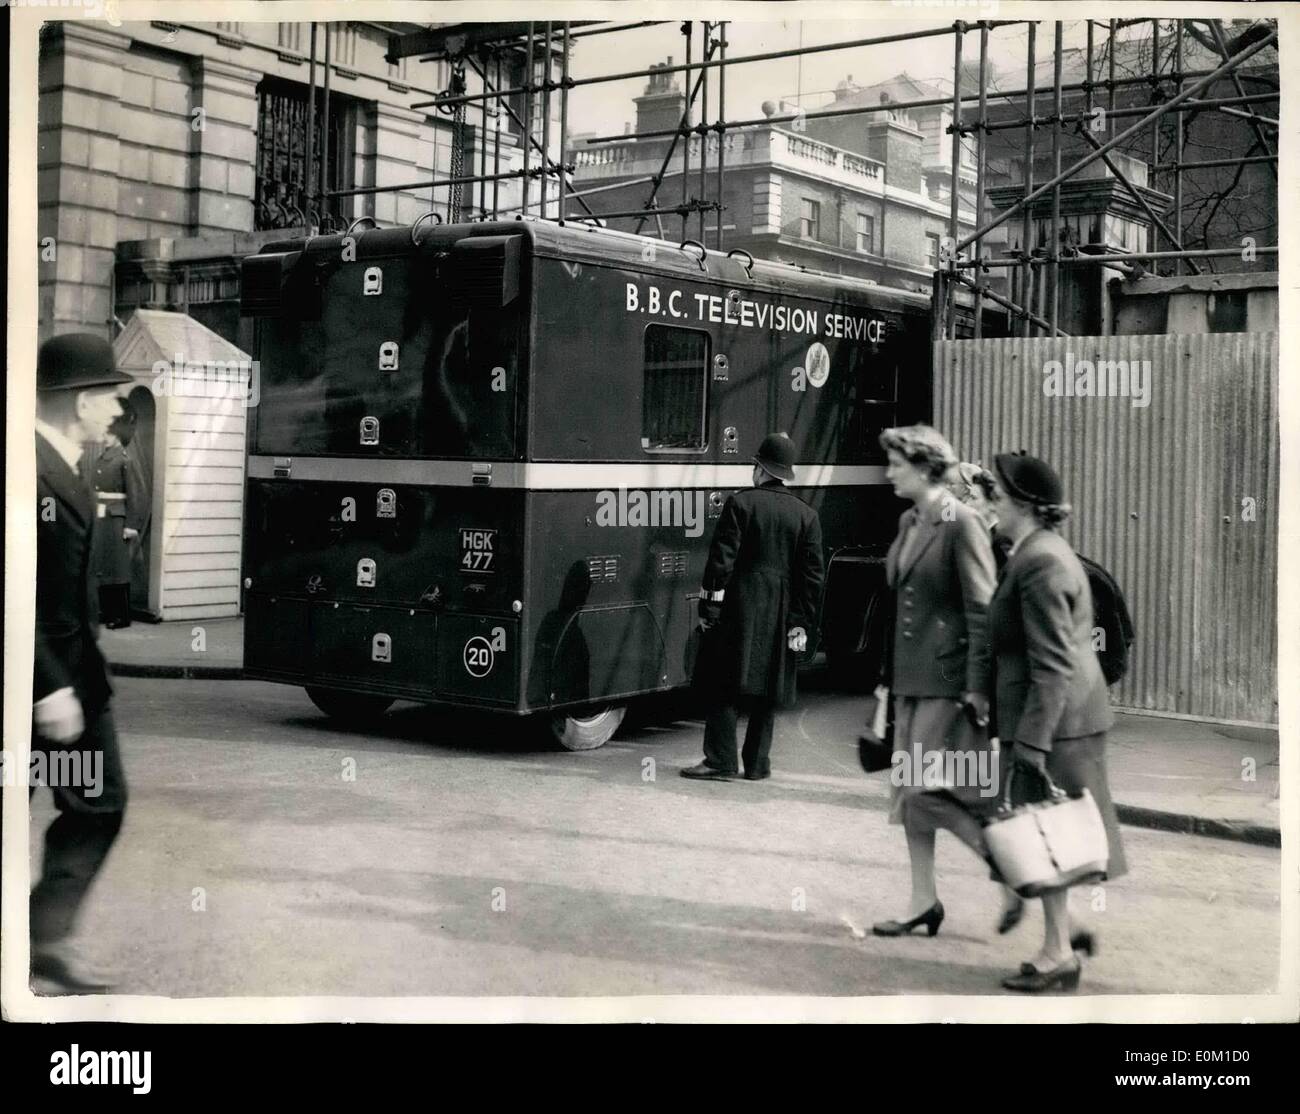 Mar. 03, 1953 - Scene In London After Death Of Queen Mary B.B.C. Television Van Goes To Marlborough House. Photo Shows: The scene this afternoon as a B.B.C. Television van drives into the grounds of Marlborough House - following the death of Queen Mary. Stock Photo